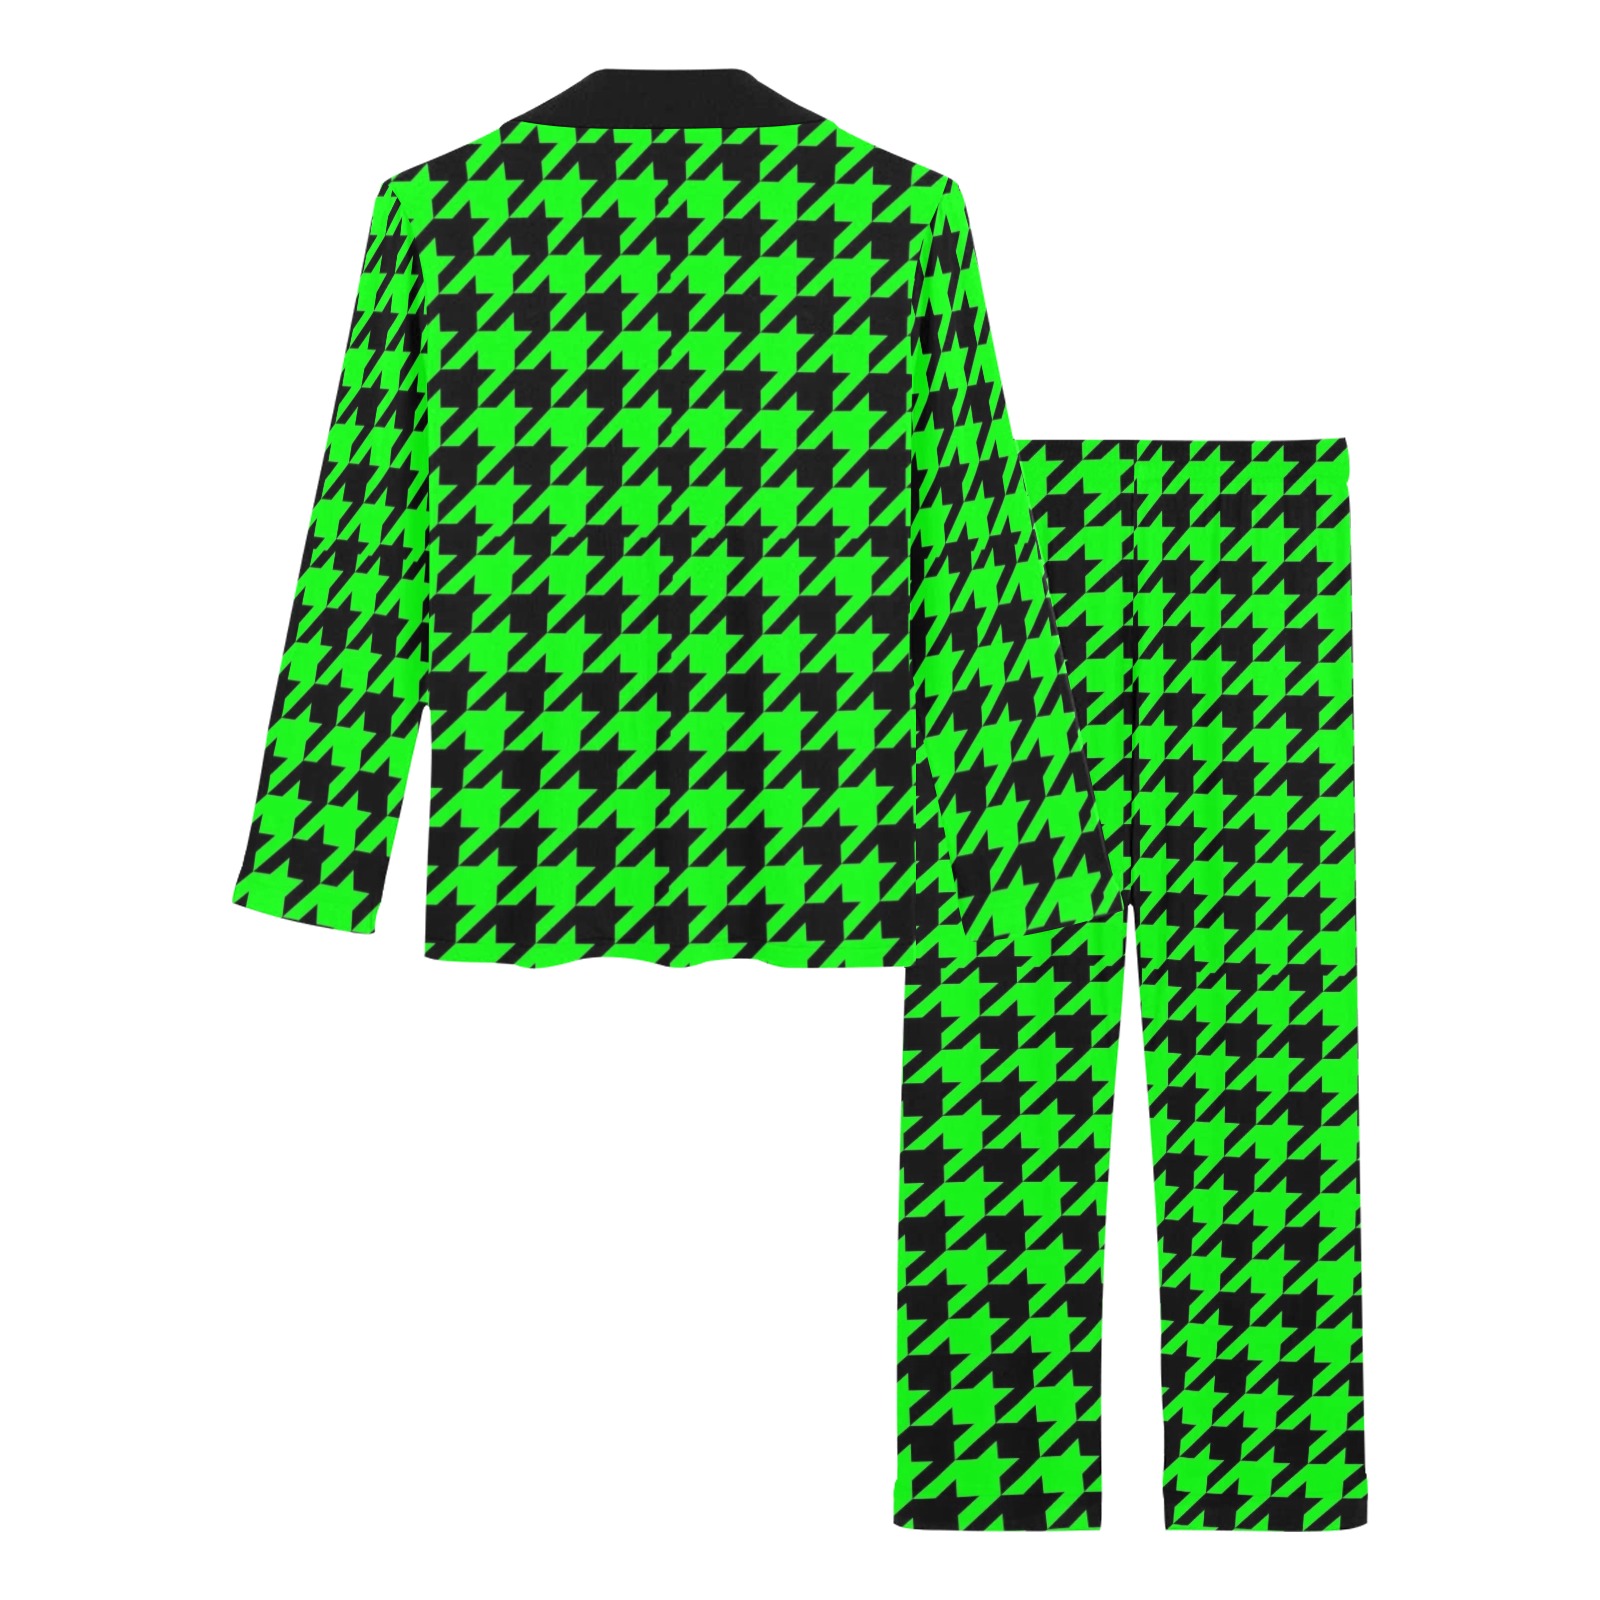 Black and Green Tight Houndstooth Women's Long Pajama Set